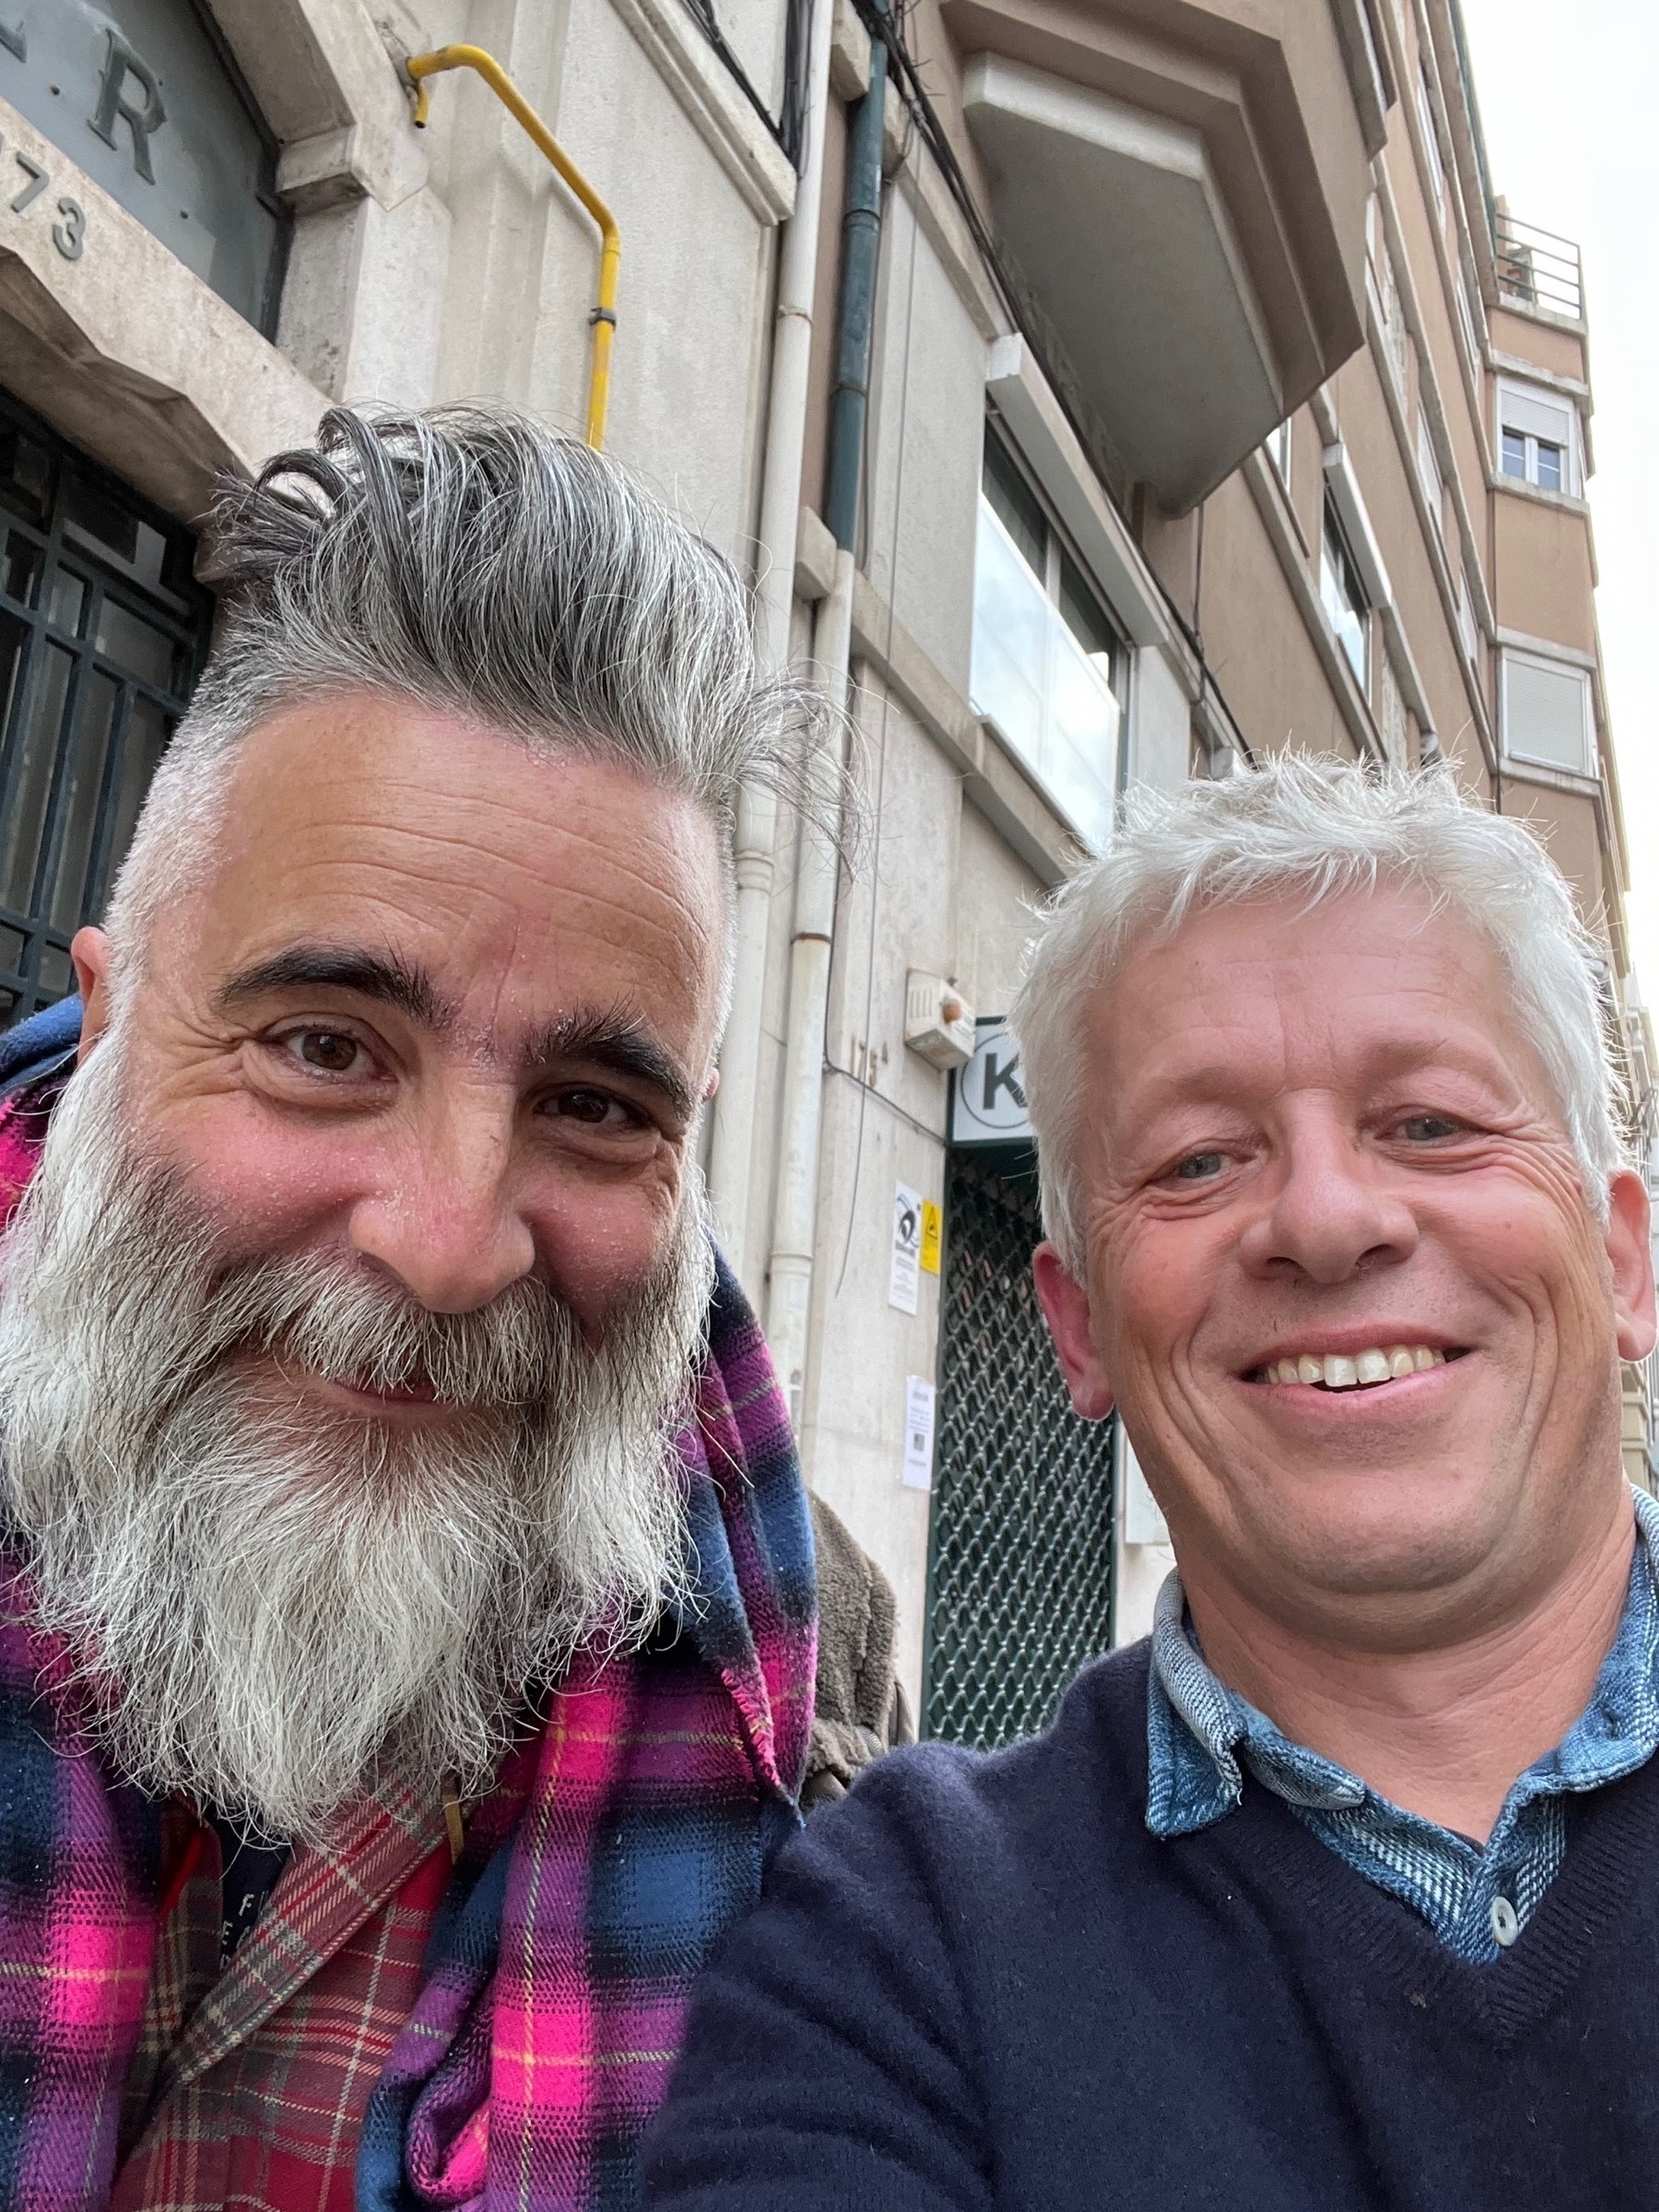 Maique and me meeting near to his apartment in Lisbon